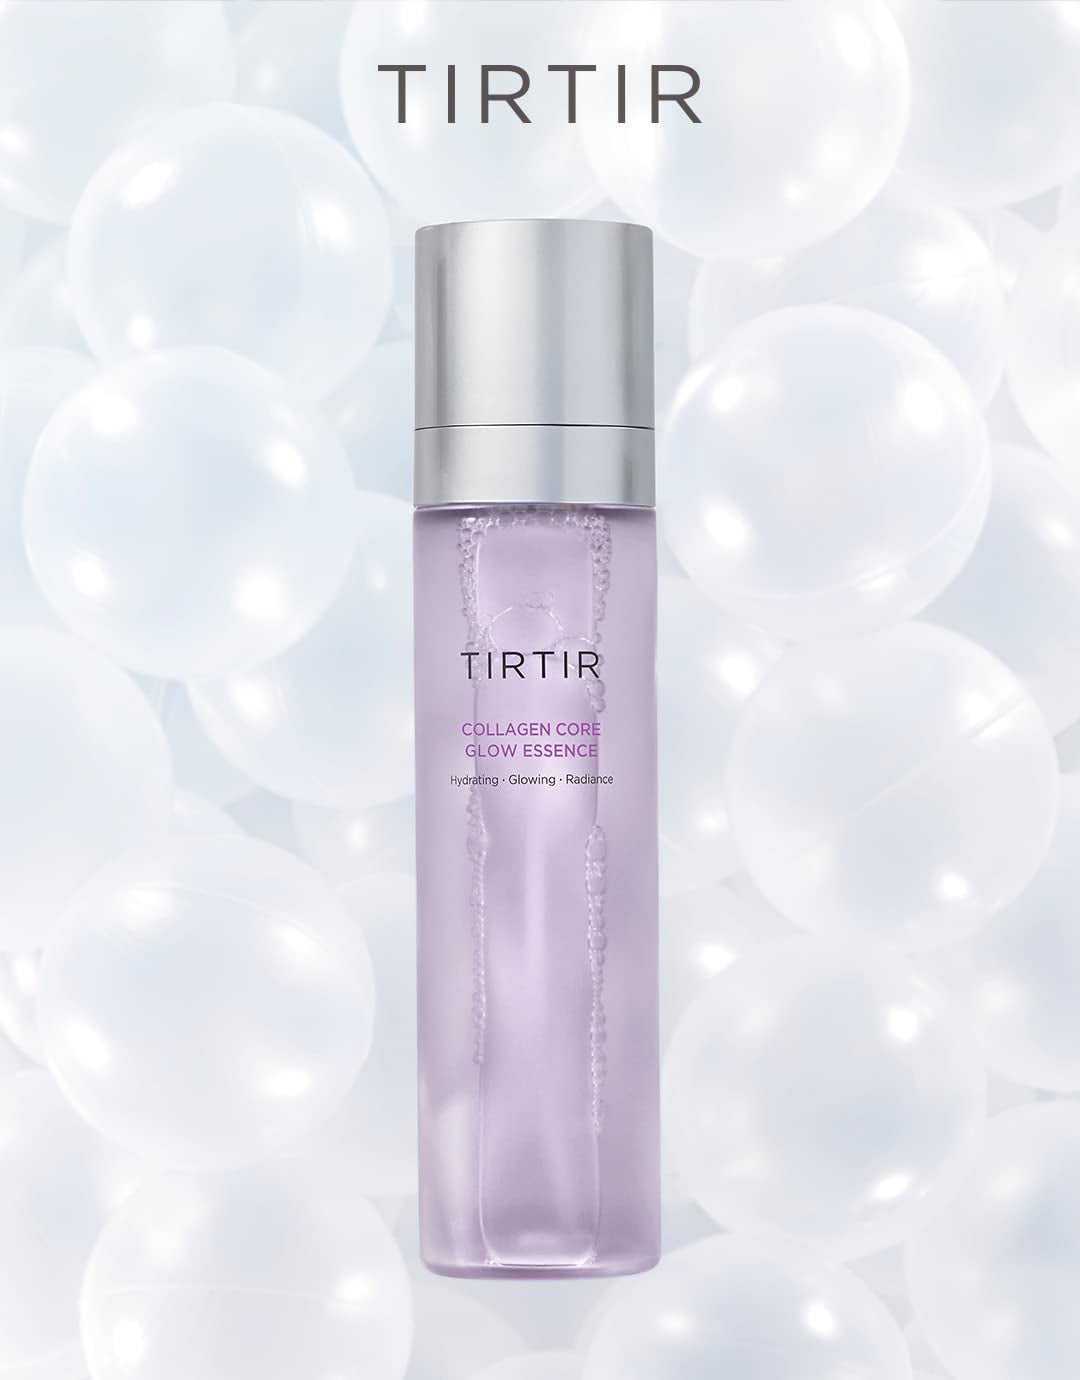 "Ultimate Hydration and Firming Mist - TIRTIR Collagen Core Glow Essence with Collagen & Hyaluronic Acid - Reveal Your Radiant Glow, 3.38 Fl.Oz."